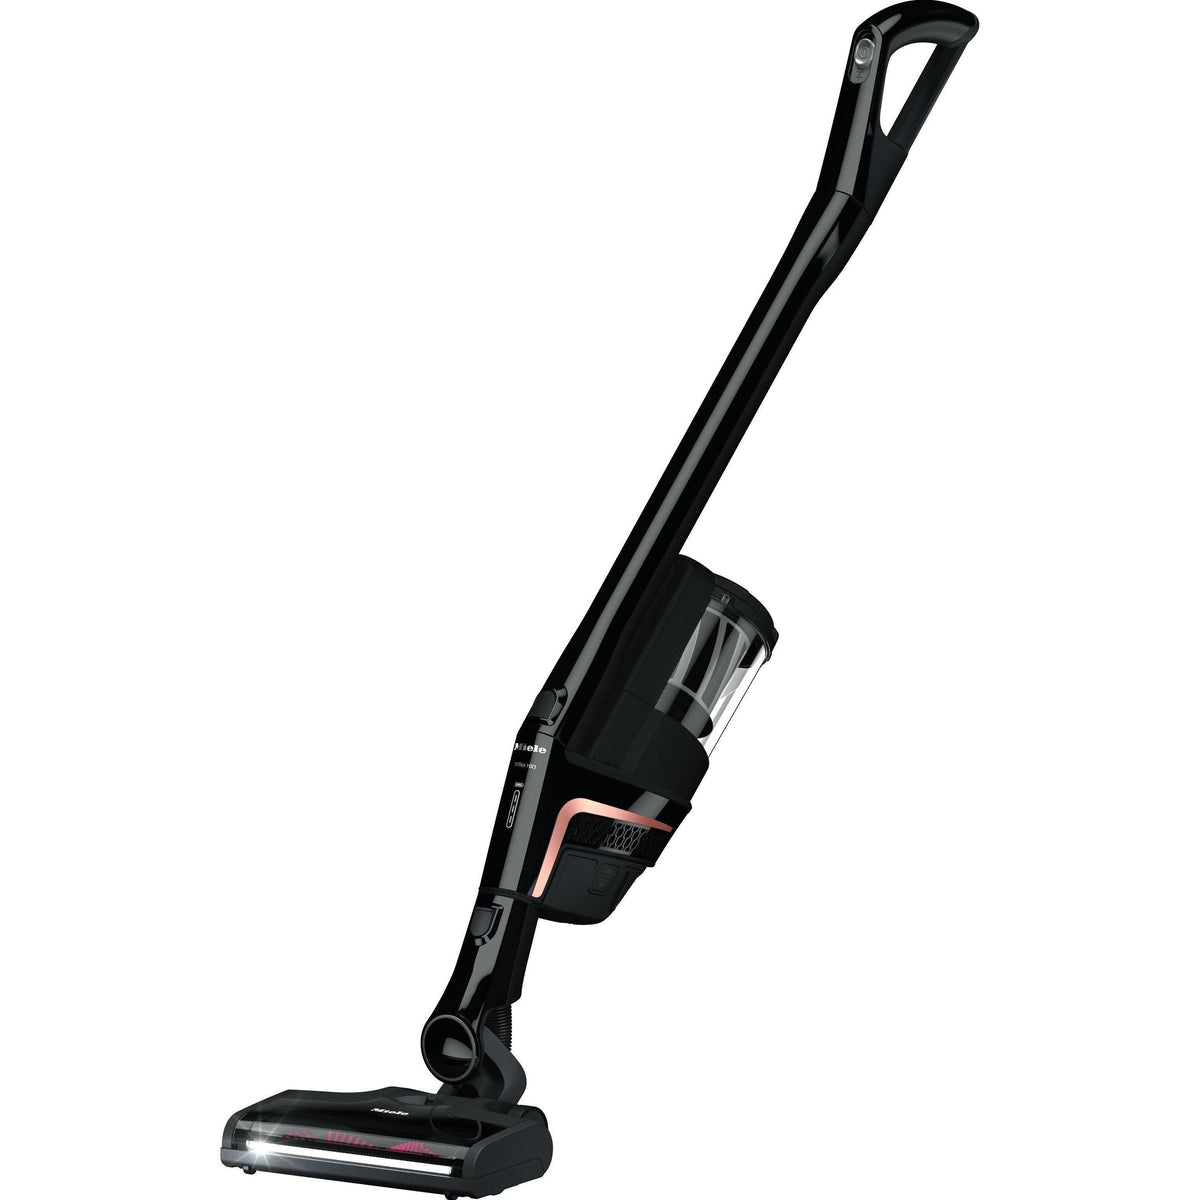 Miele Triflex Cat &amp; Dog Cordless Vacuum cleaner - Black from DID Electrical - guaranteed Irish, guaranteed quality service. (6977433796796)